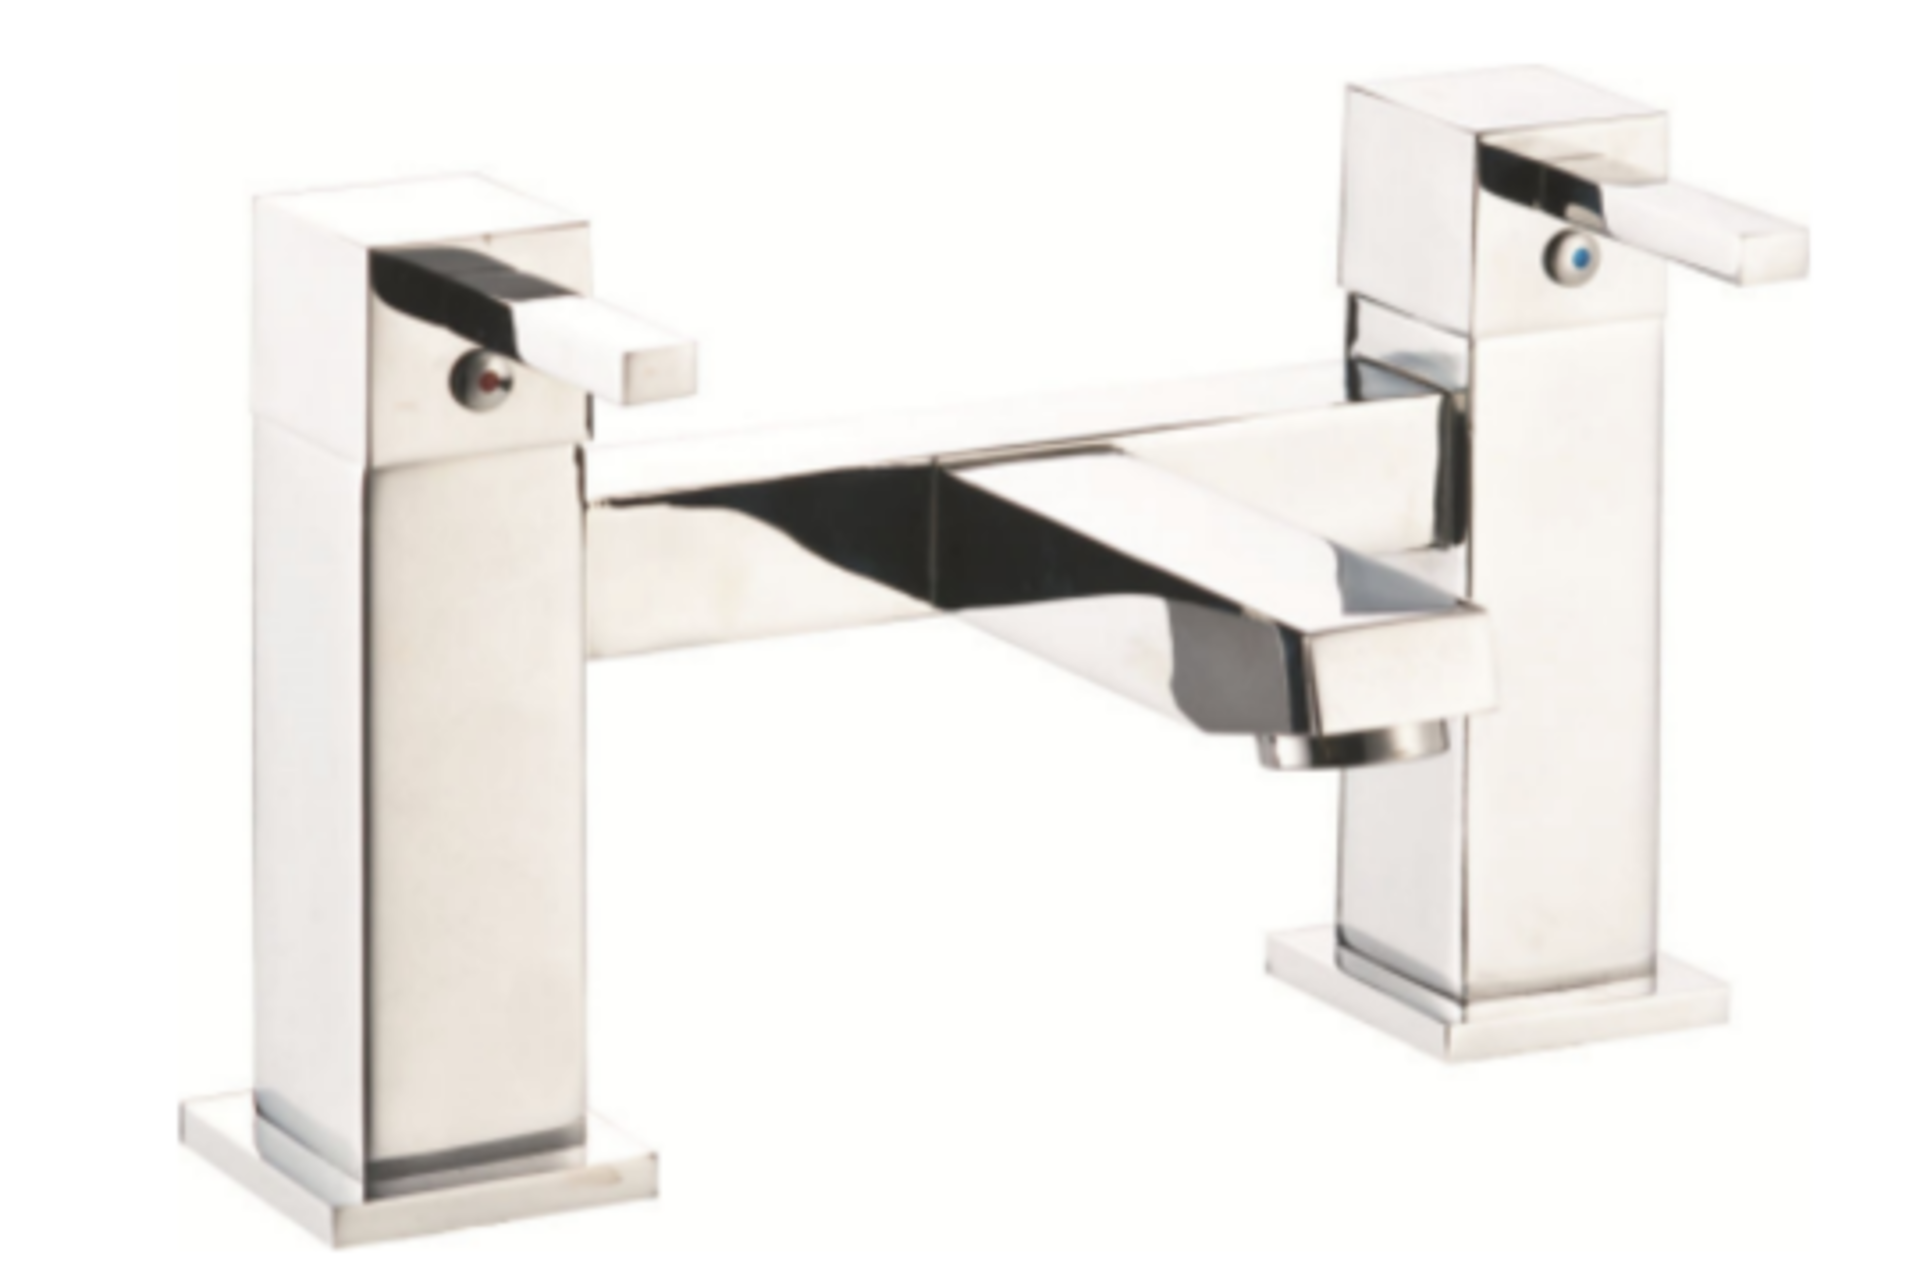 TRADE LOT 10 x NEW BOXED Abode Lamona CONTEMPORARY CHROME BATH TAPS. RRP £129.99 EACH, GIVING THIS